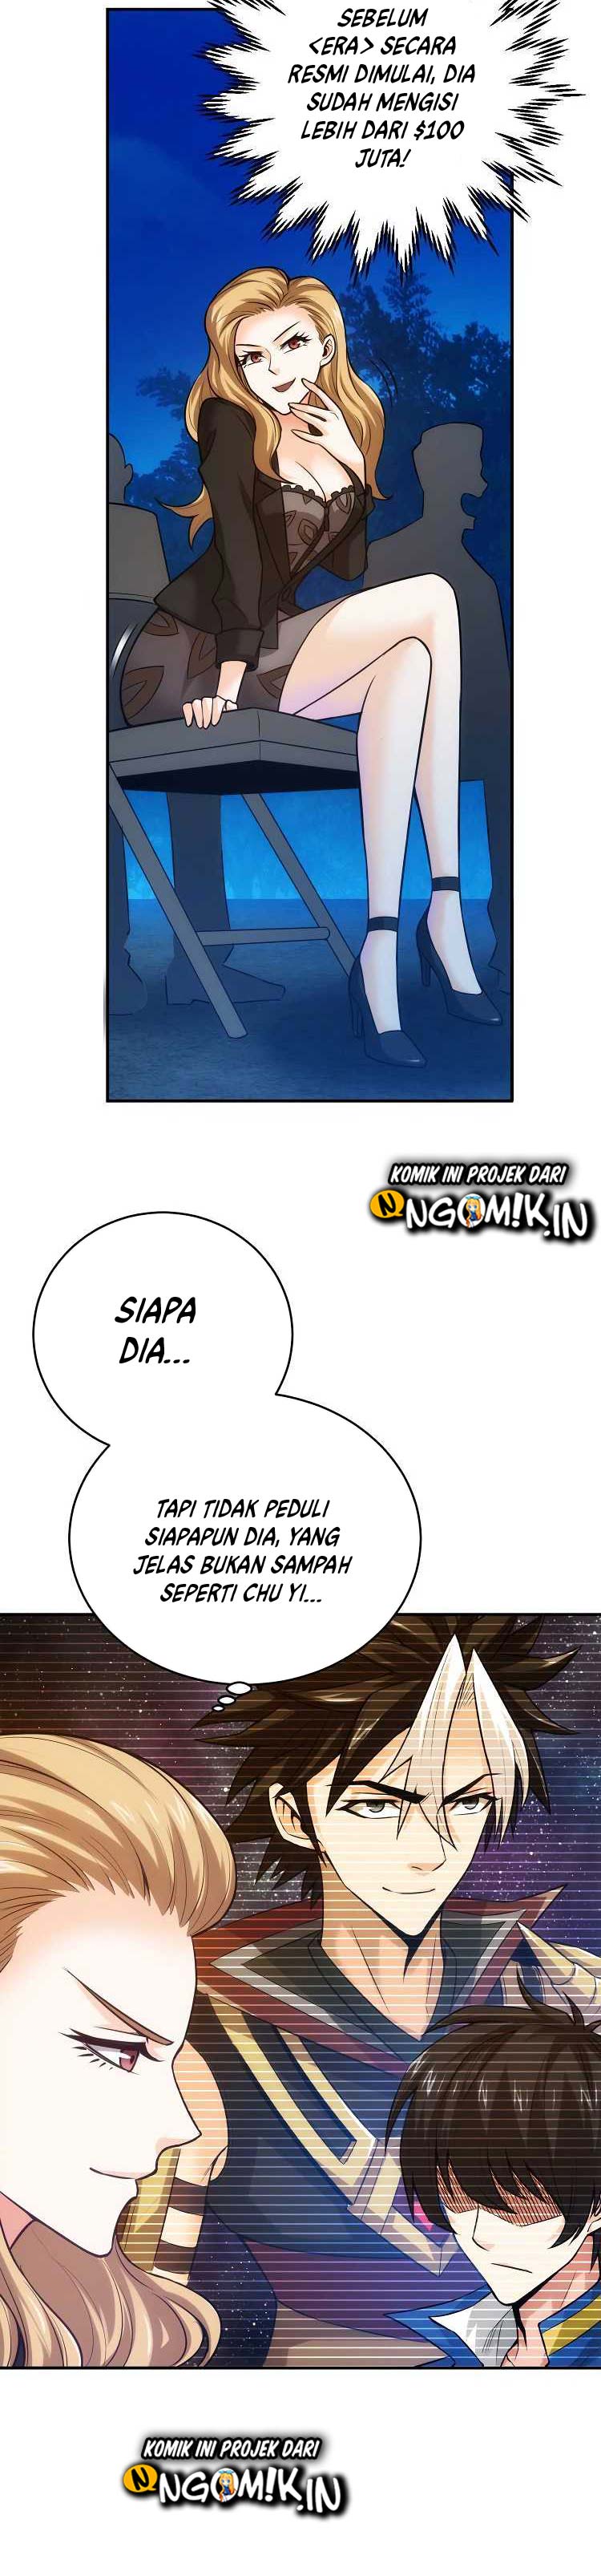 Rich Player Chapter 32 5